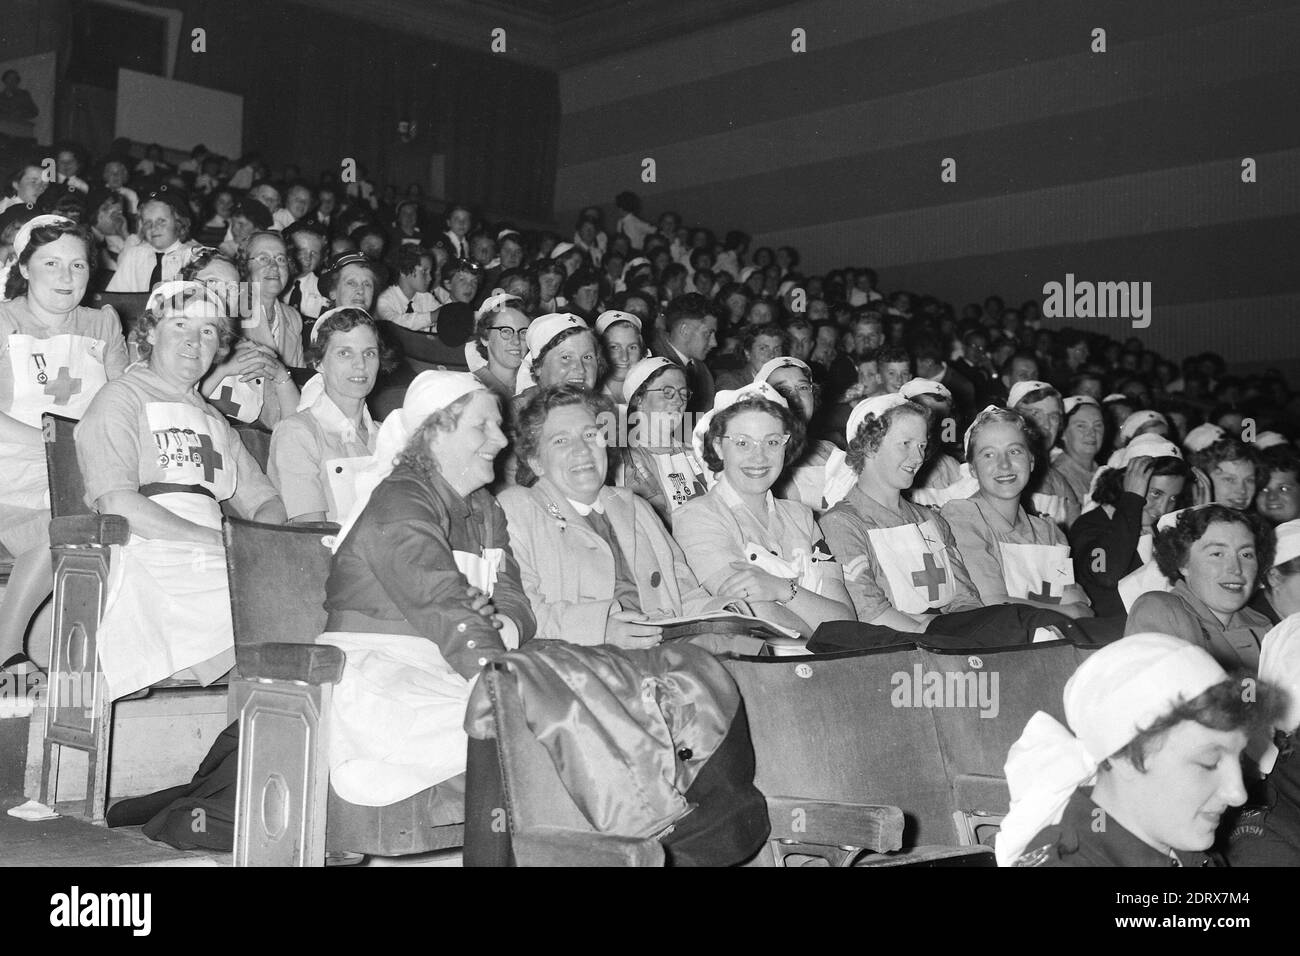 Butlins Holiday Camp. Skegness, Lincolnshire, England, UK. Scanned negatives fro the 1950s Women from the Red Cross in theatre seated area Stock Photo